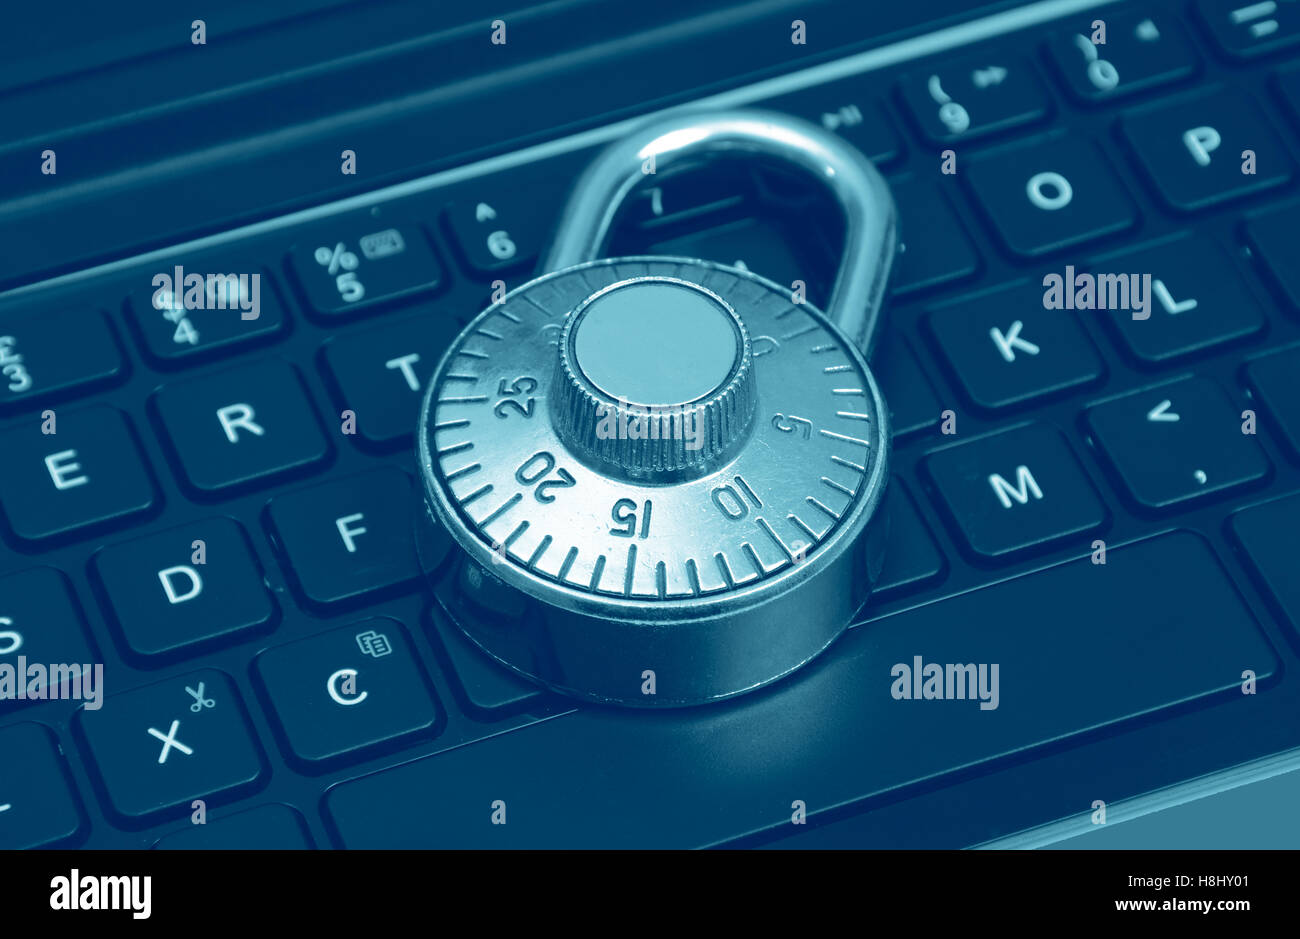 Computer security concept with a closed padlock on the keyboard. Stock Photo